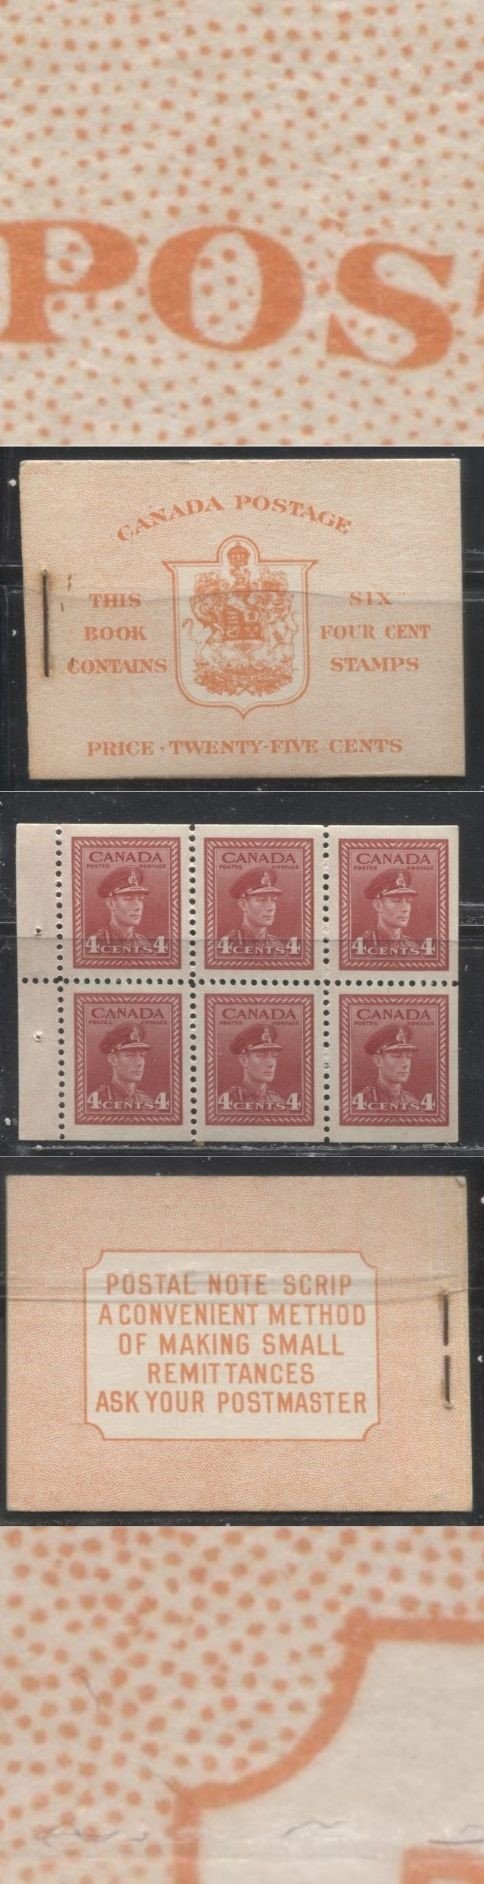 Lot 81 Canada #BK36d 1942-1949 War Issue,Type II, Complete 25¢ English Booklet, 1 Pane of 4c Carmine-Red, Horizontal Mesh Paper, Harris Front Cover IIi, Back Cover Type Caiii, 7c and 6c Rate Page